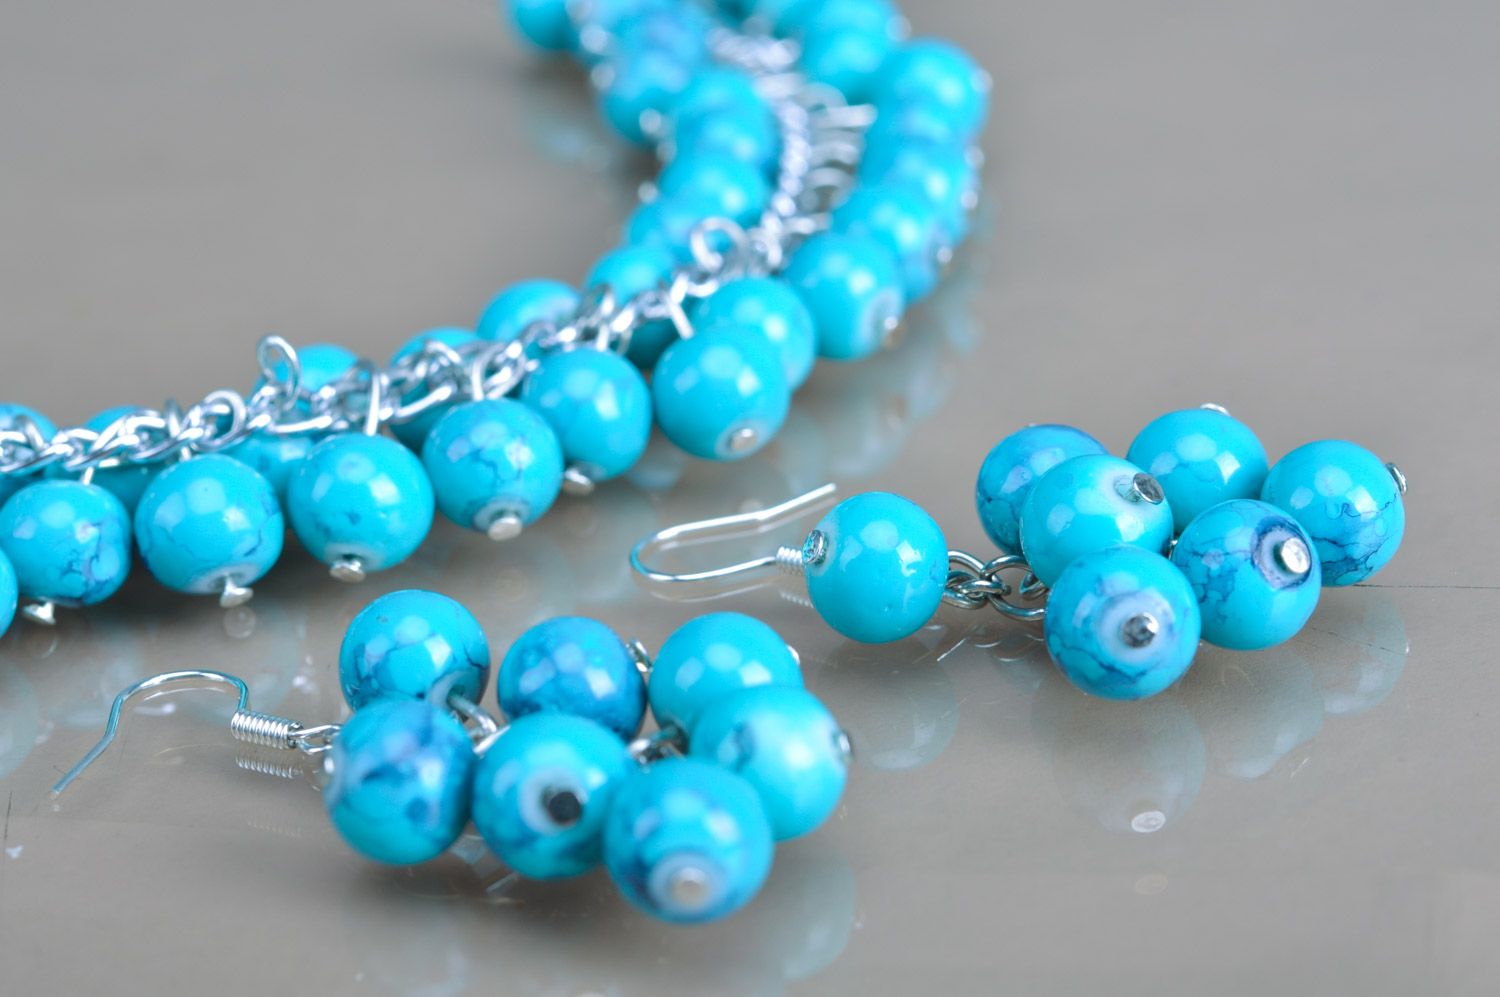 Handmade ceramic bead jewelry set 2 items blue earrings and necklace photo 4